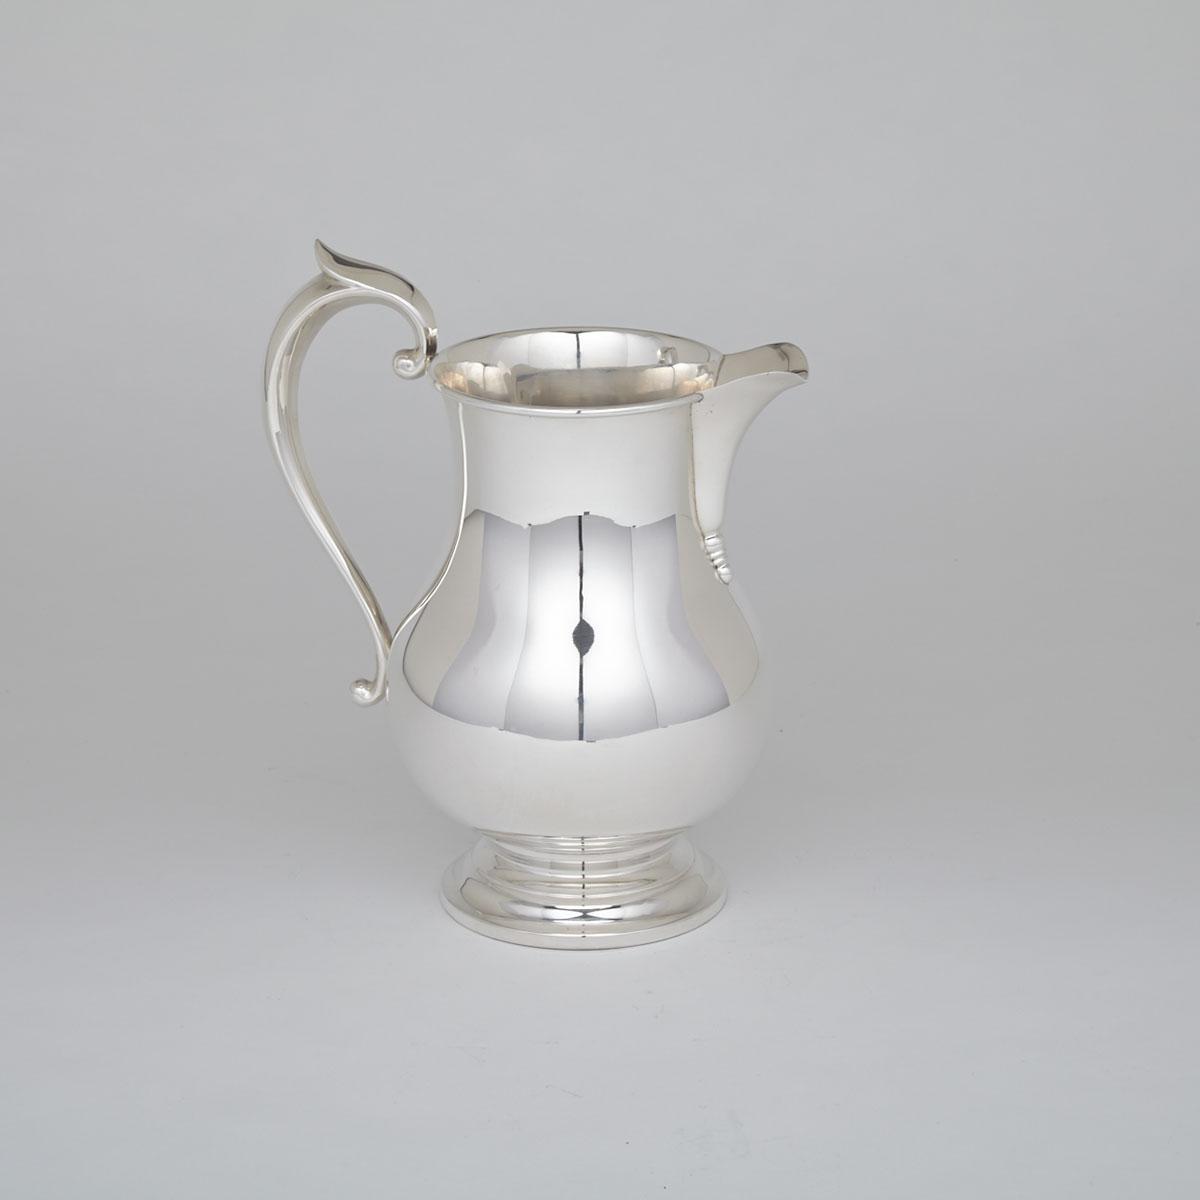 American Silver Water Jug, Hunt Silver Co., New York, N.Y. and Chicago, Ill., 20th century